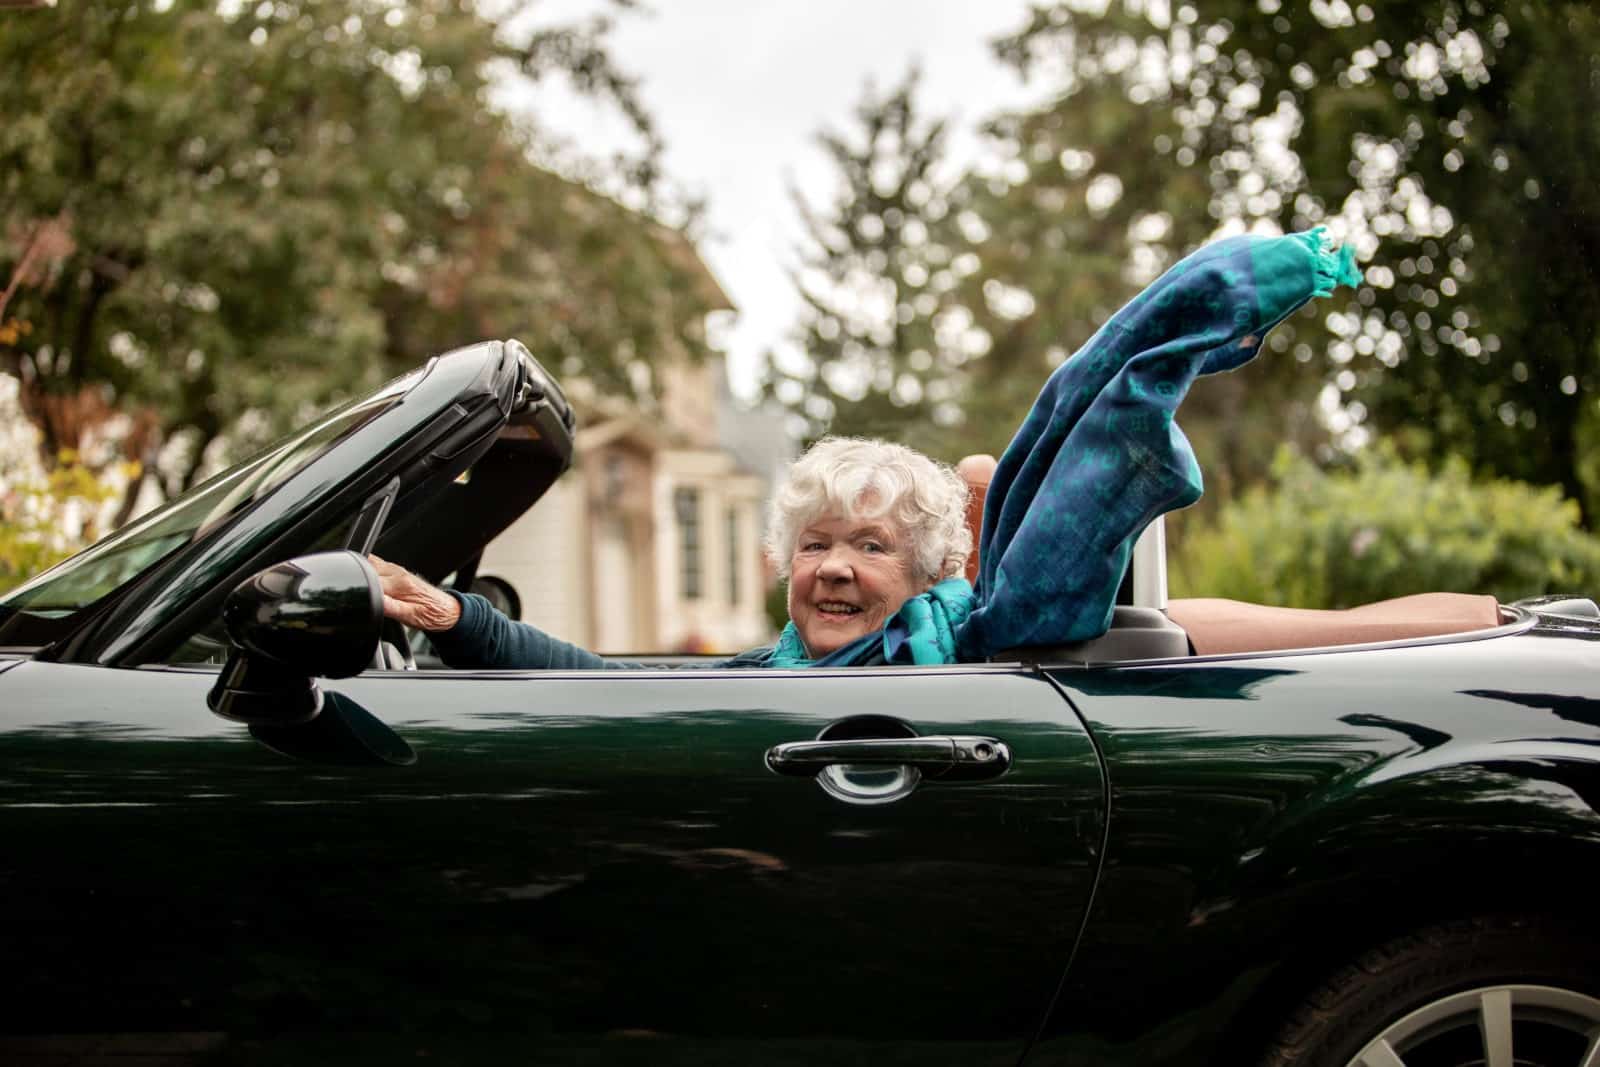 Judy Carson is in the driver’s seat of a green convertible. Her scarf flowing in the wind.